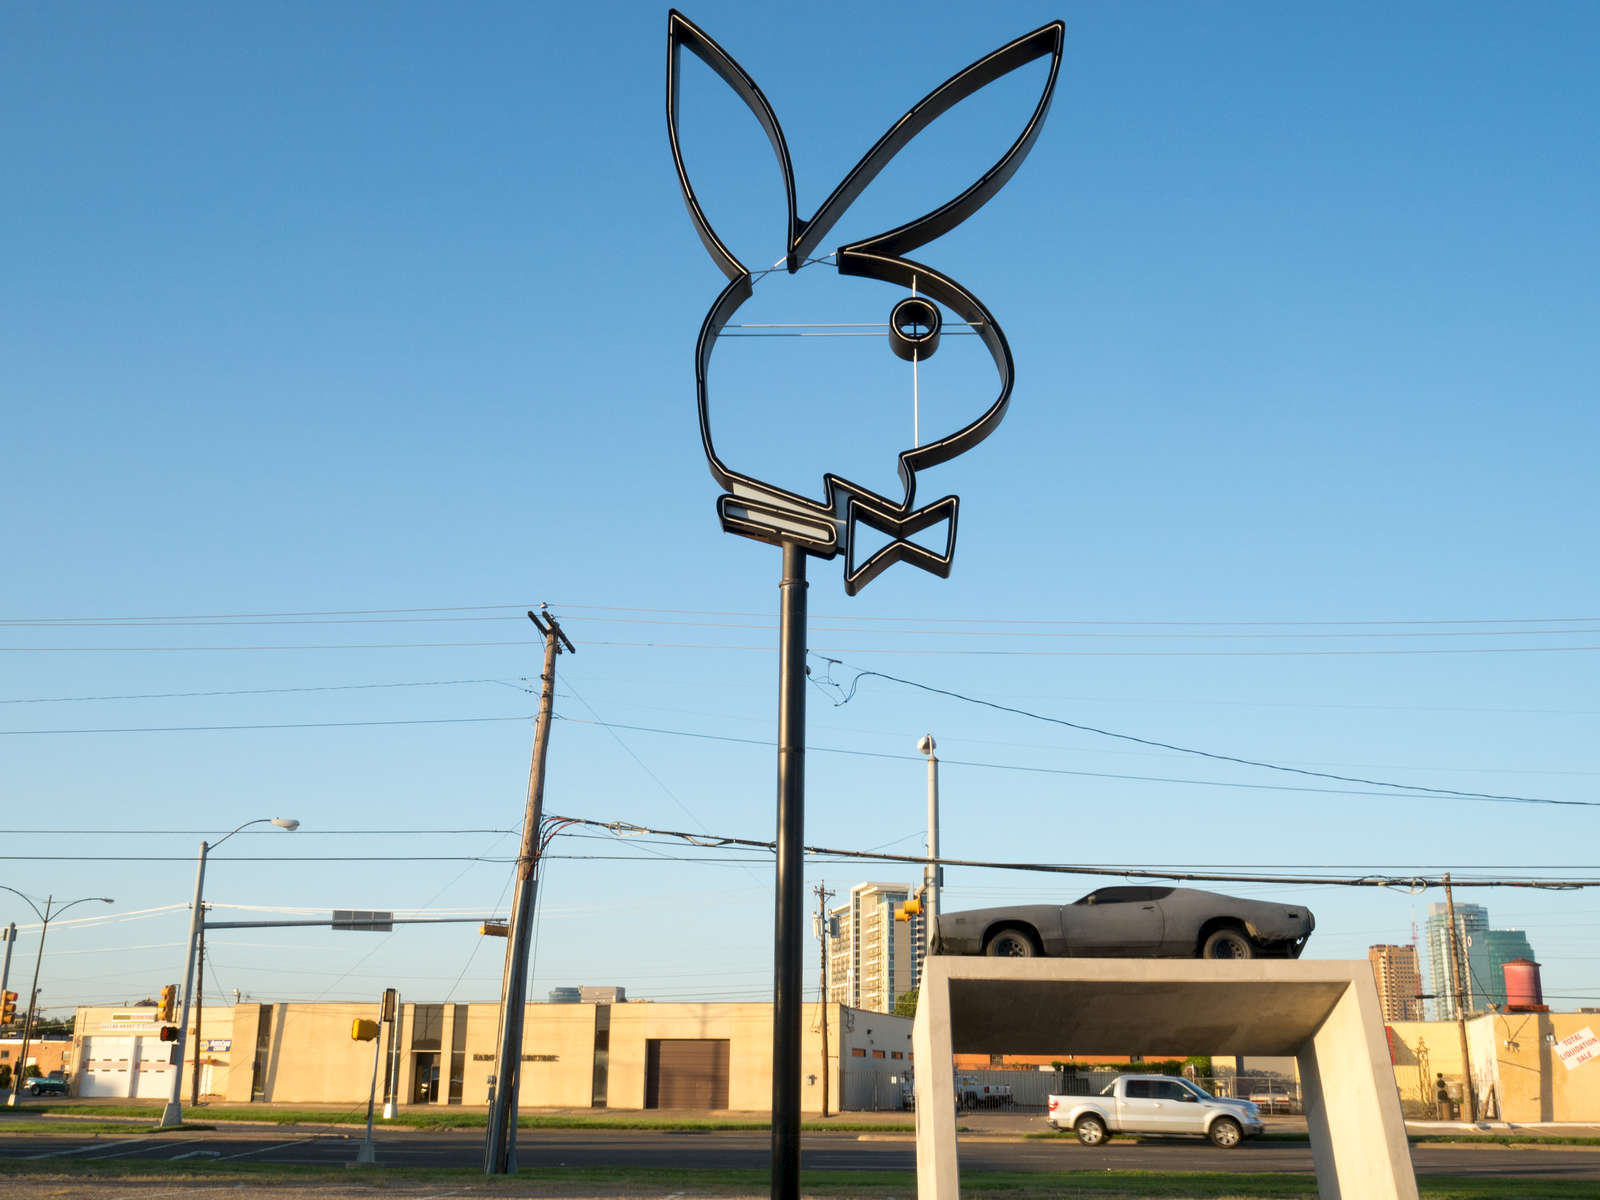 A Playboy Bunny sign in a derelict plot off Market Center Boulevard in Dallas.Dallas is a major city in Texas and is the largest urban center of the fourth most populous metropolitan area in the United States. The city ranks ninth in the U.S. and third in Texas after Houston and San Antonio. The city's prominence arose from its historical importance as a center for the oil and cotton industries, and its position along numerous railroad lines.For two weeks in the summer of 2015, photographer Peter Dench visited Dallas to document the metroplex in his epic reportage, DENCH DOES DALLAS.Photographed using an Olympus E-M5 Mark II©Peter Dench/Getty Images Reportage